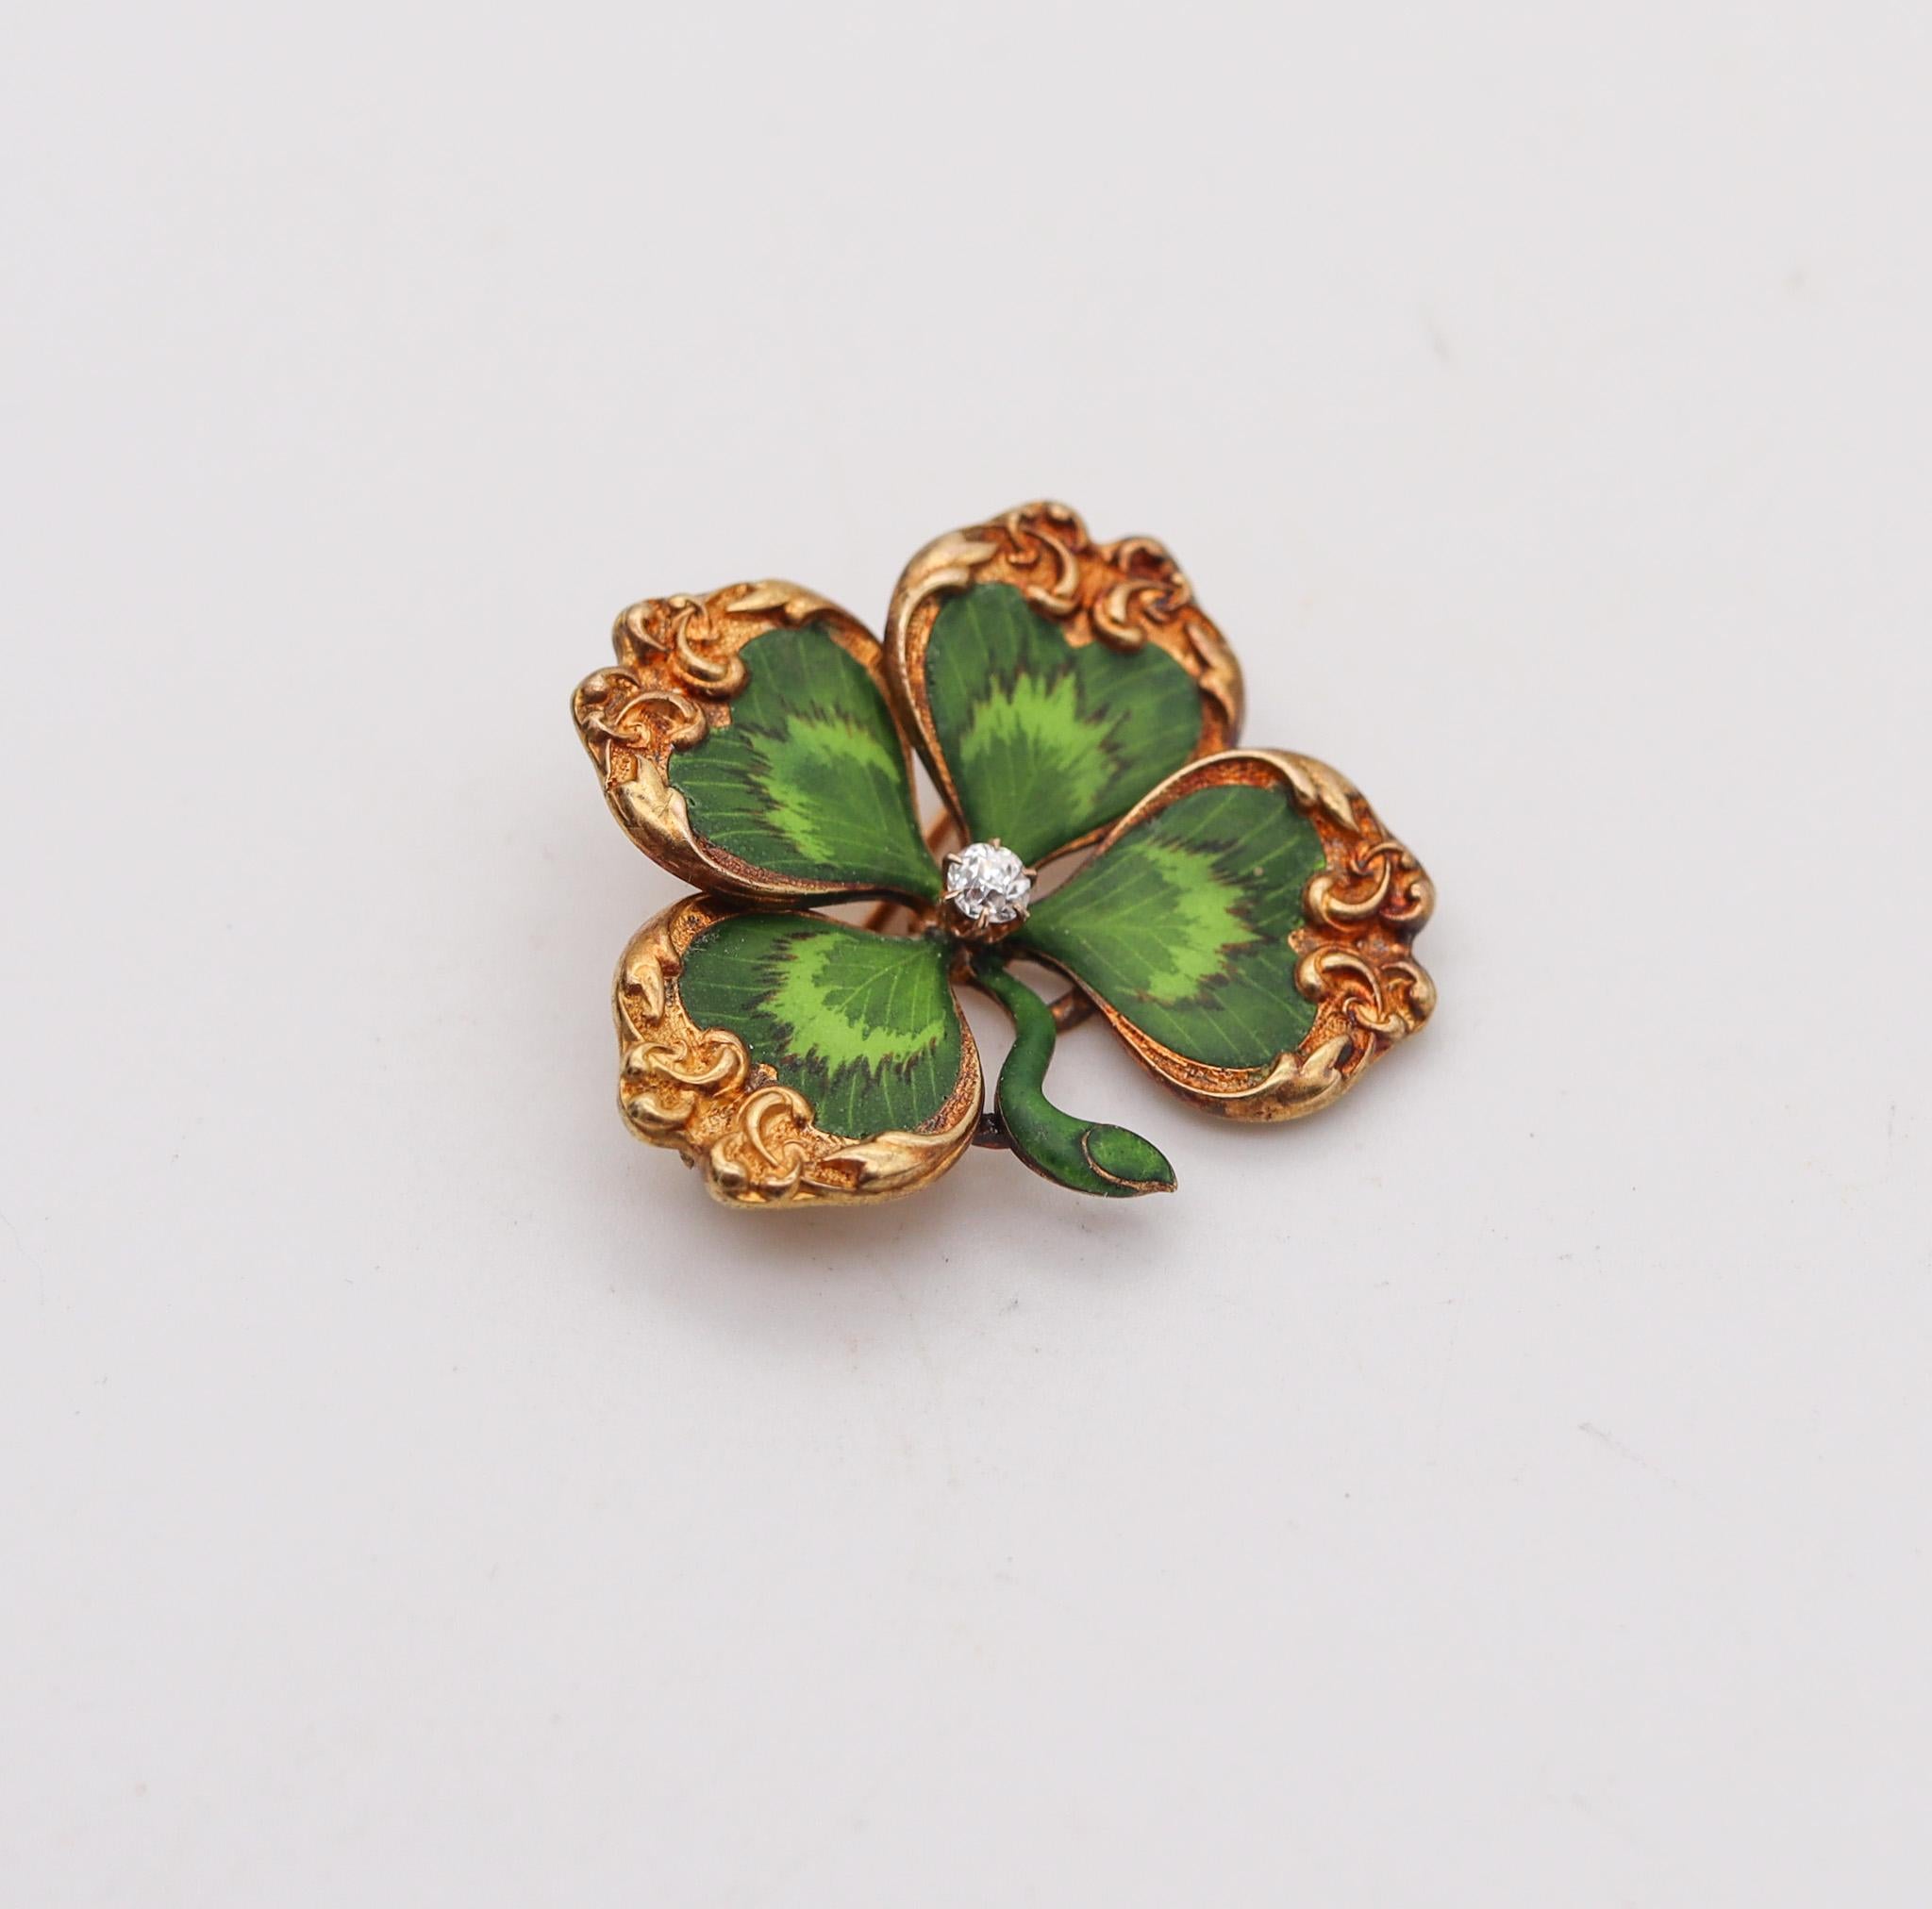 Edwardian enamel four-leaf Clover brooch.

A beautiful piece, created in America during the Edwardian and the Art Nouveau periods, around the 1905. This outstanding little brooch has been carefully crafted in the shape of a four-leaves clover in